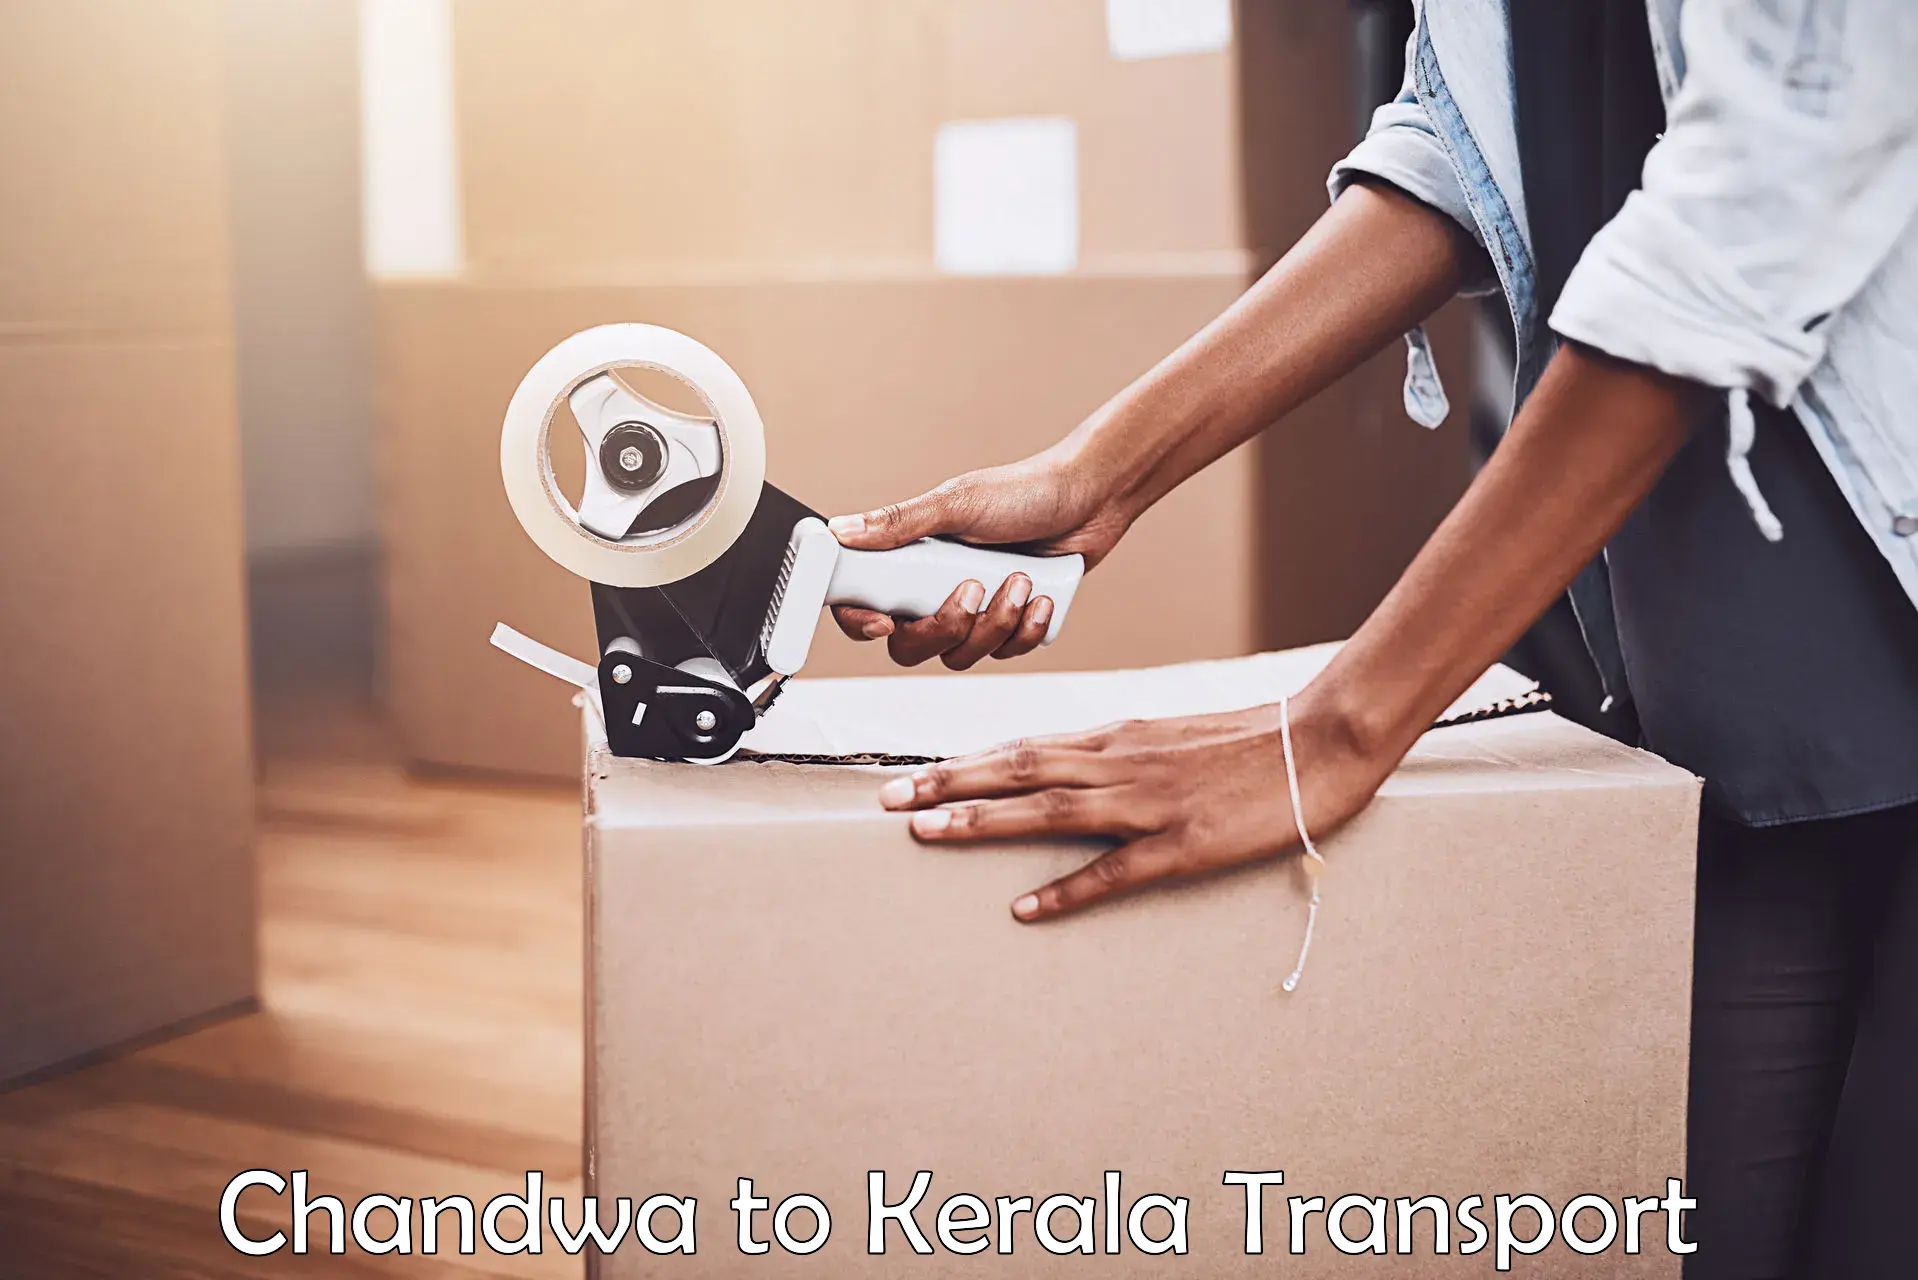 Road transport online services Chandwa to Kerala